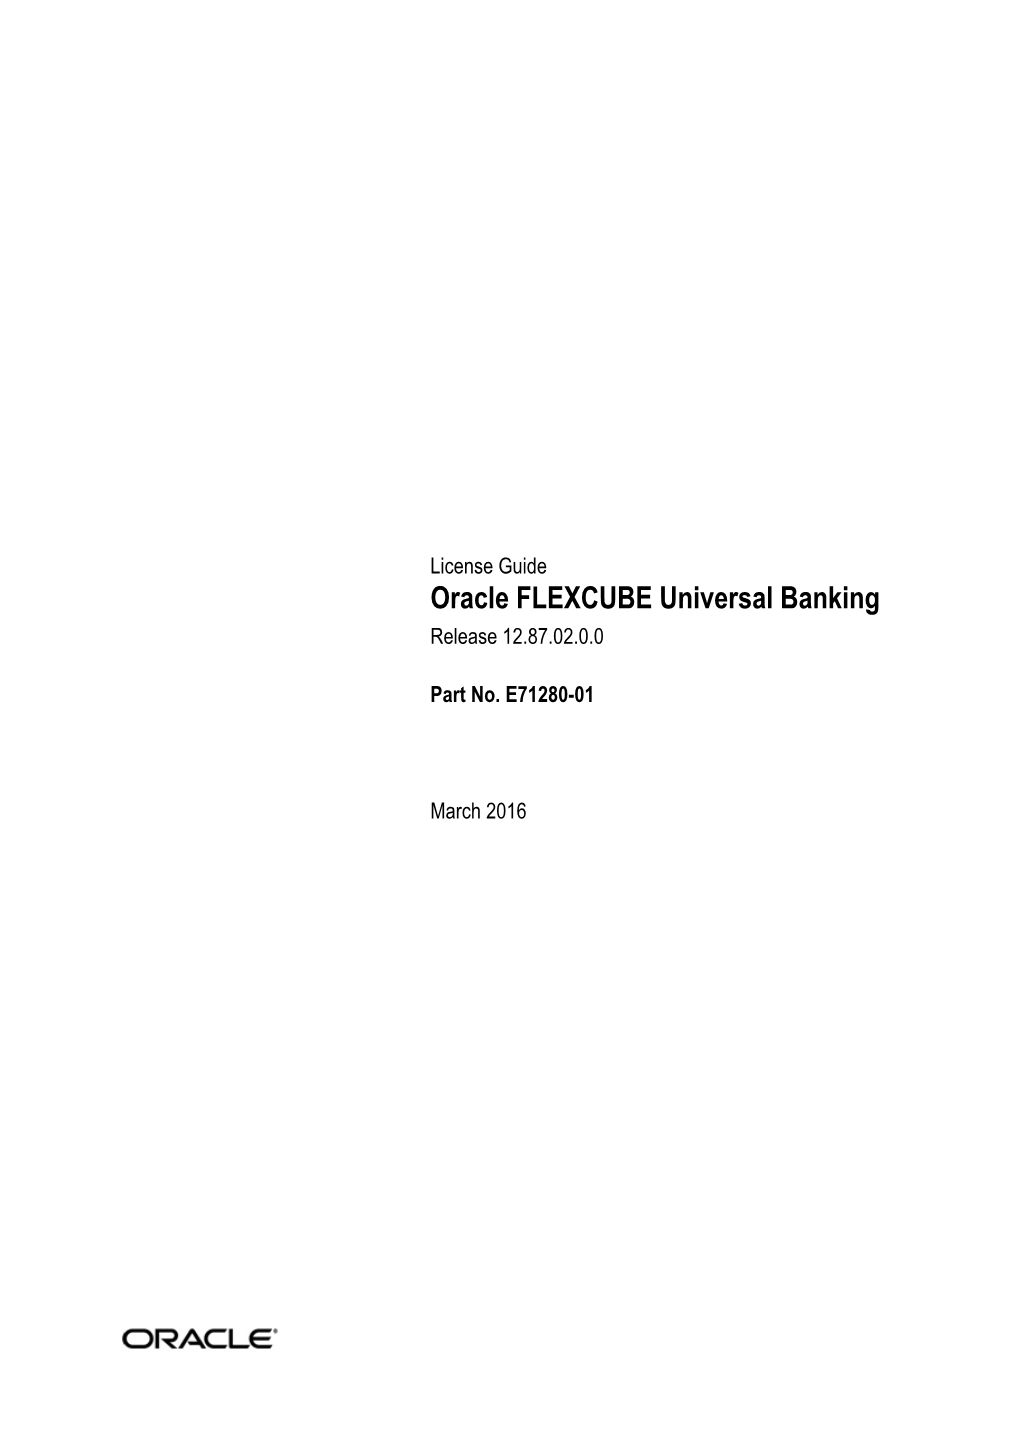 License Guide Oracle FLEXCUBE Universal Banking Release 12.87.02.0.0